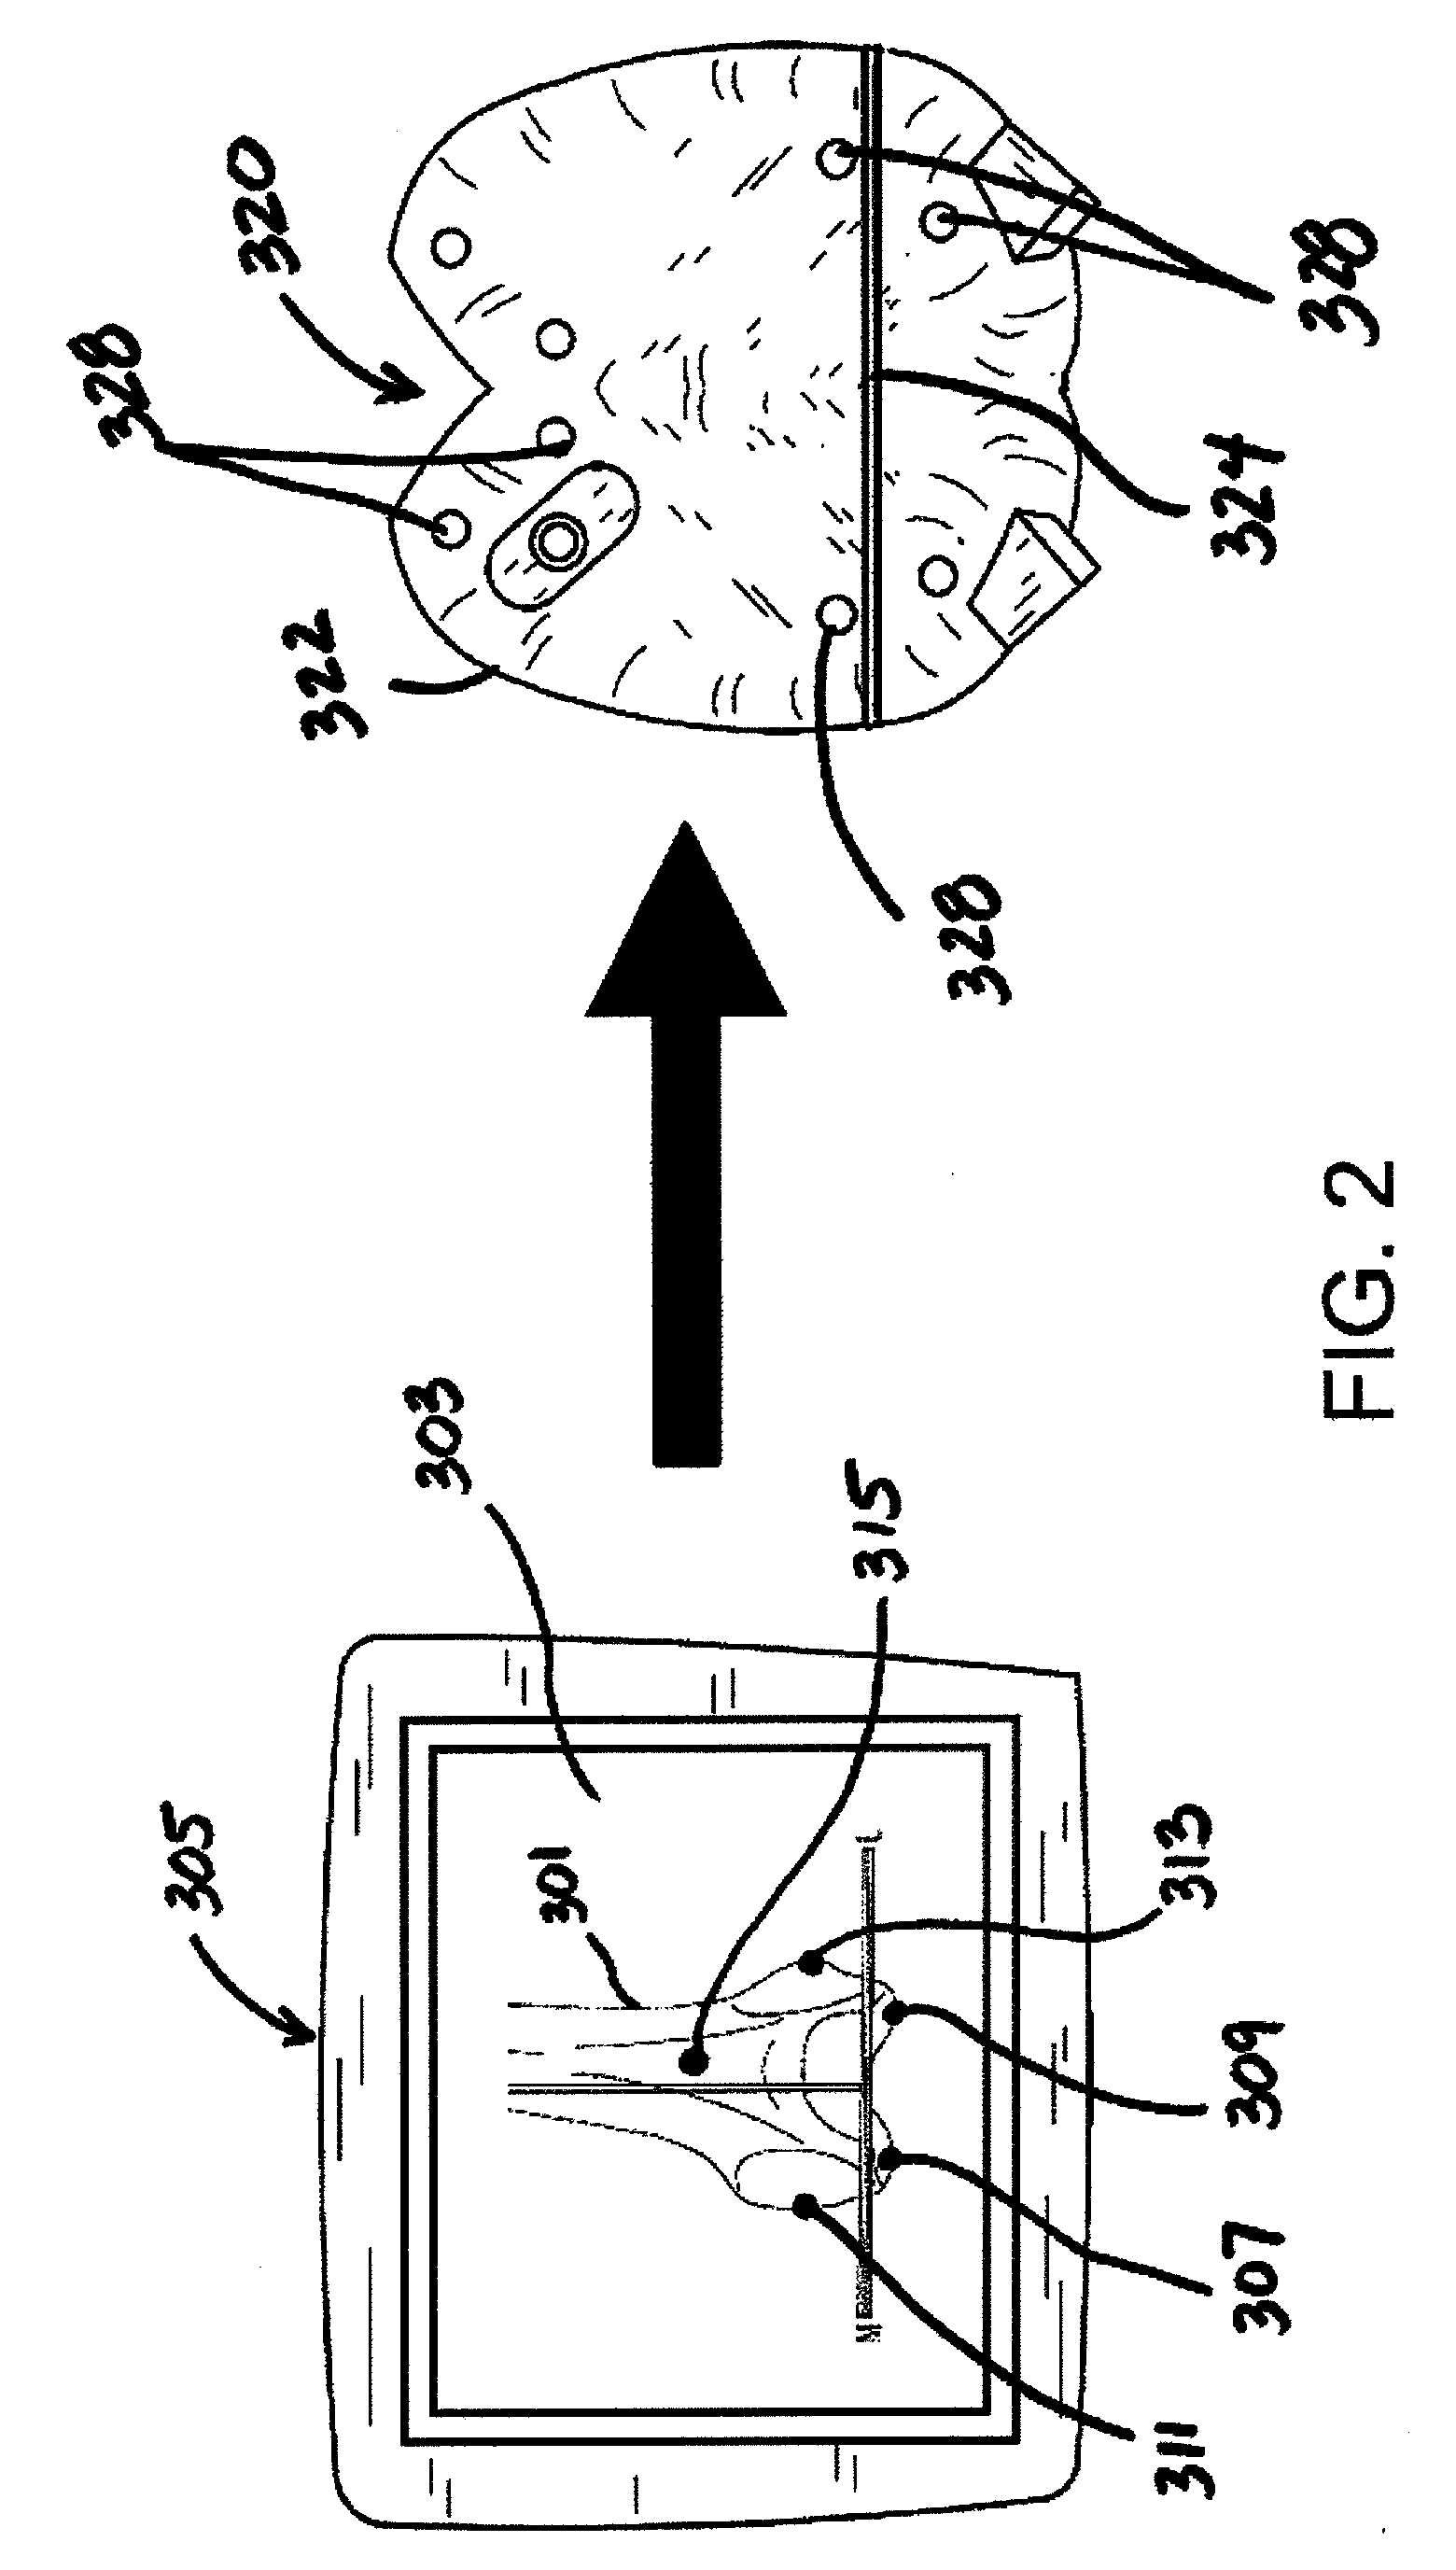 Patient-matched surgical component and methods of use